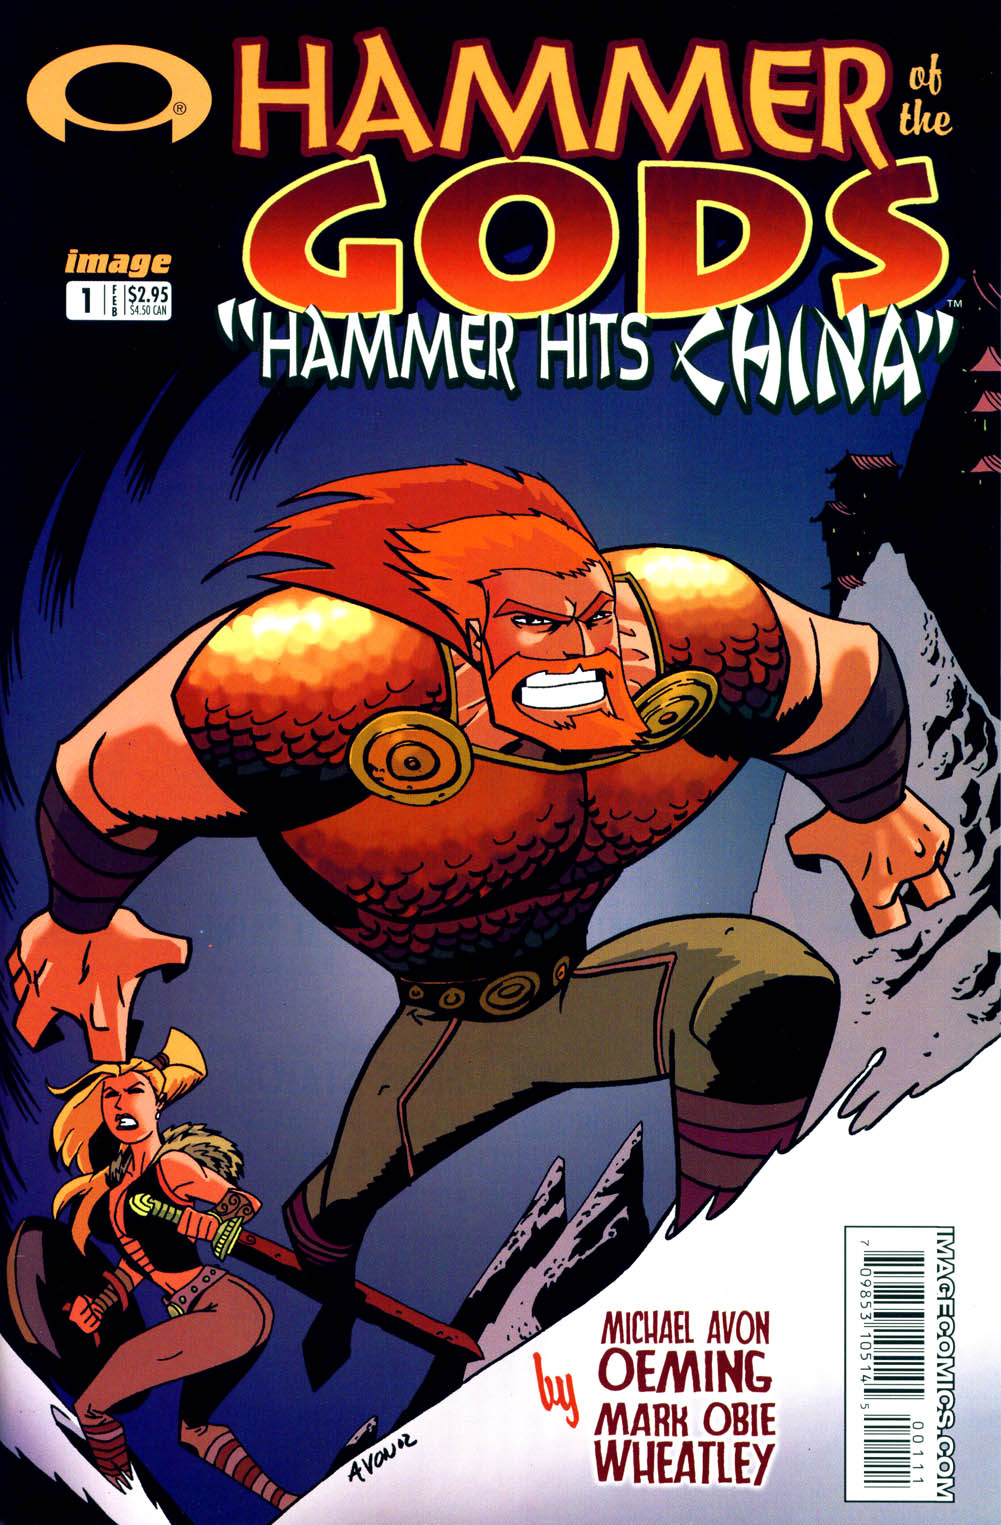 Read online Hammer of the Gods: Hammer Hits China comic -  Issue #1 - 1